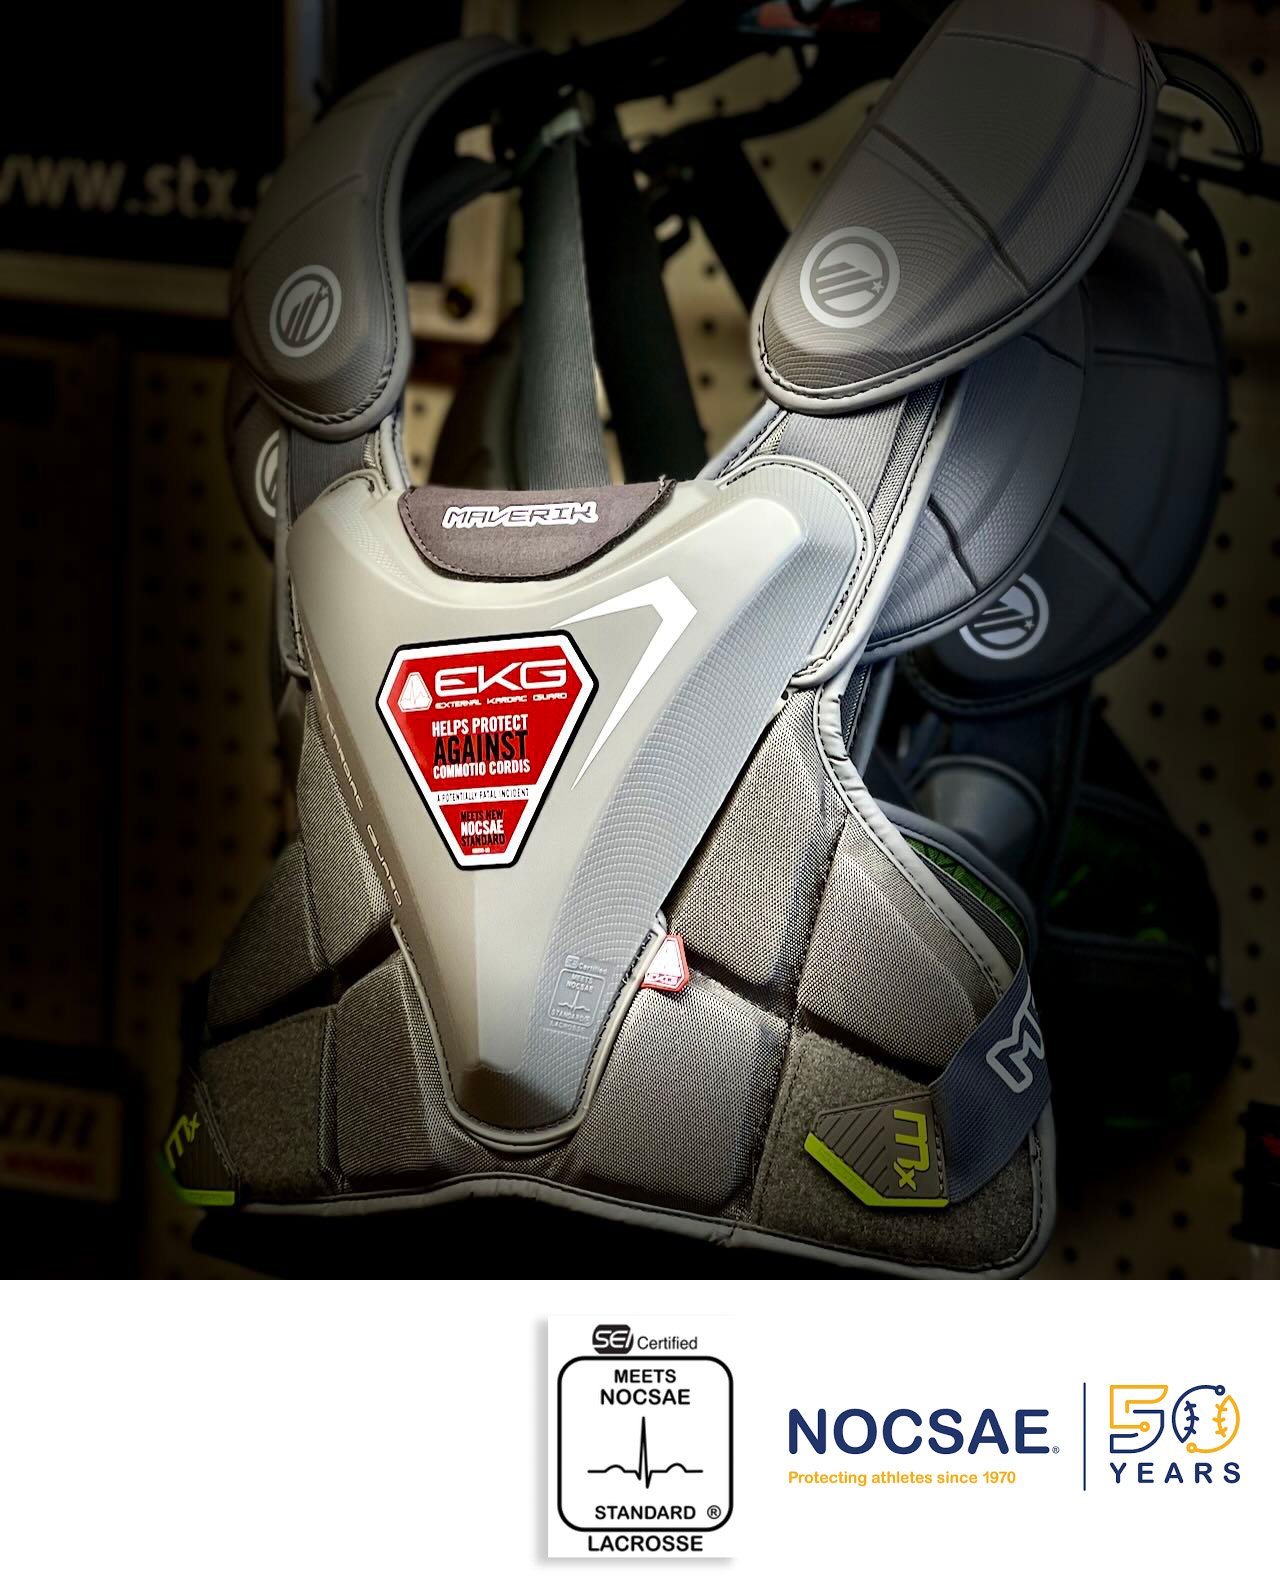 Lacrosse Shoulder Pads: What Parents, Coaches, and Players Need to Know —  welcome to the Good Sport!